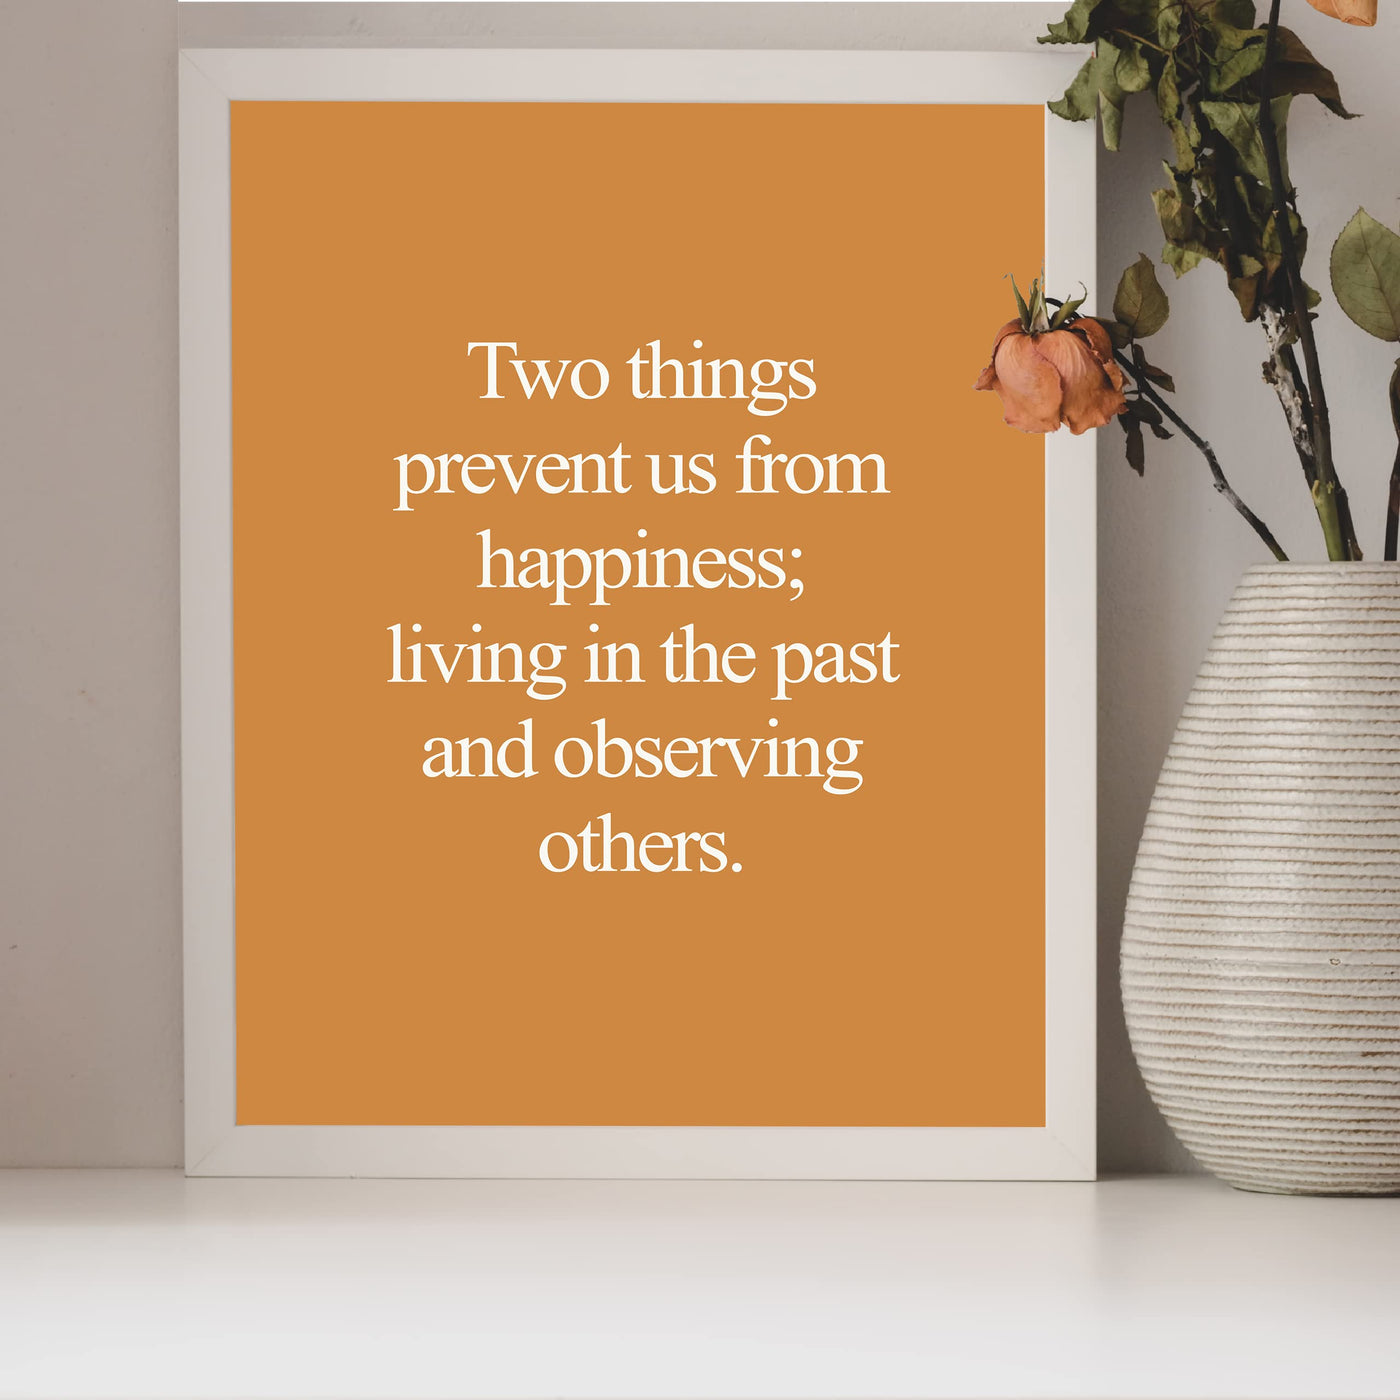 Two Things Prevent Happiness: Living In Past & Observing Others Inspirational Quotes Wall Decor -8 x 10" Motivational Art Print -Ready to Frame. Home-Office-School-Work Decor. Great Life Lesson!